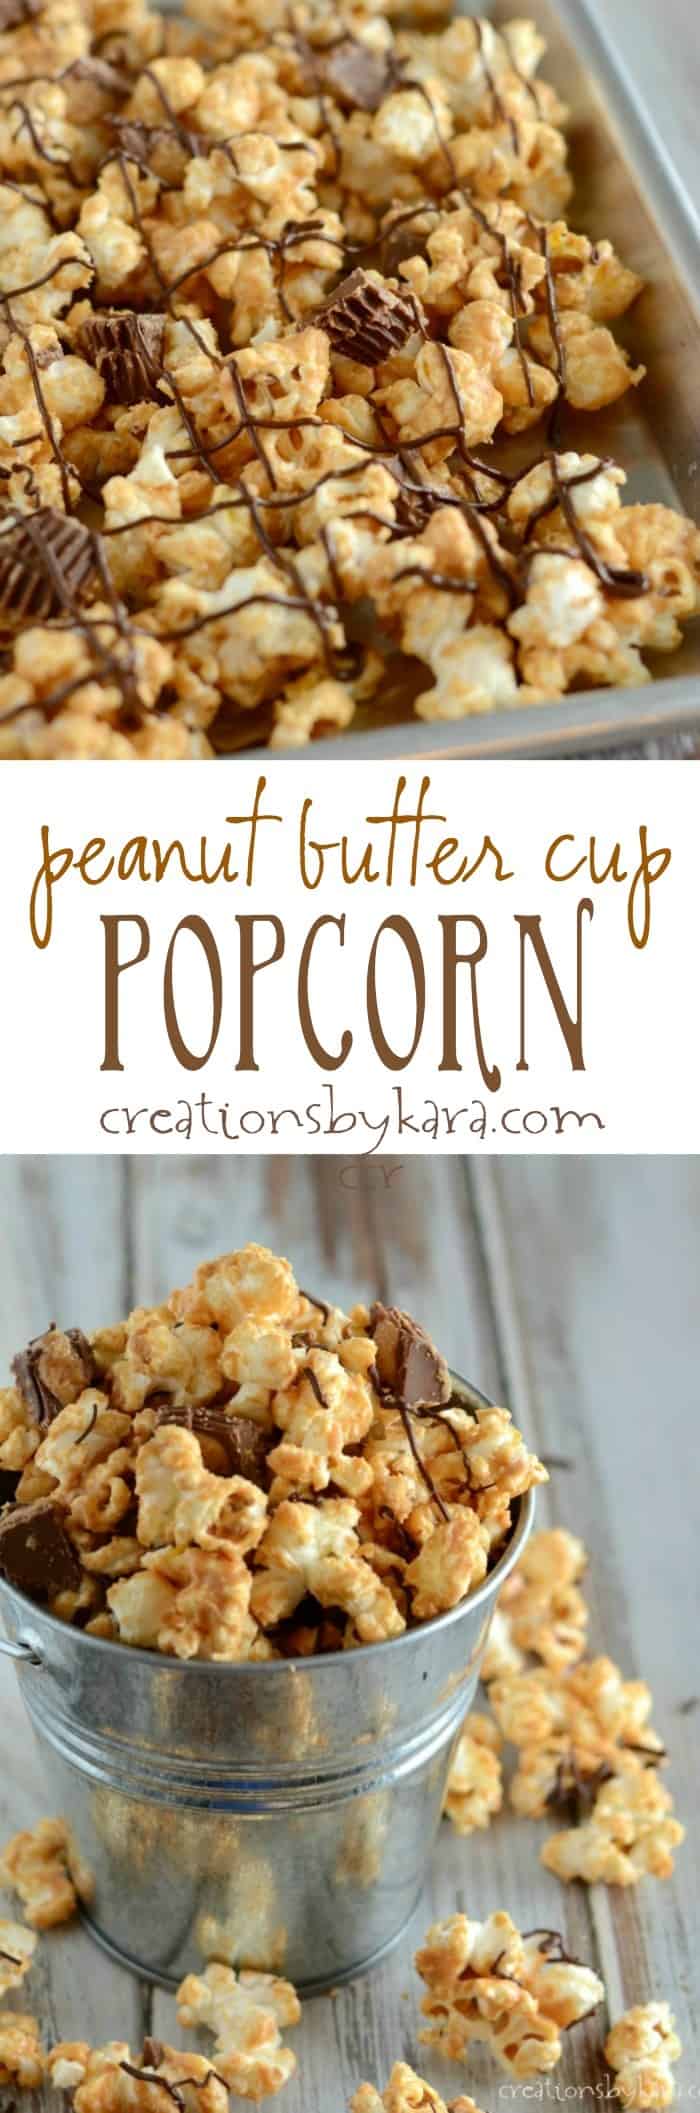 Reese's Peanut Butter Cup Popcorn - Creations by Kara